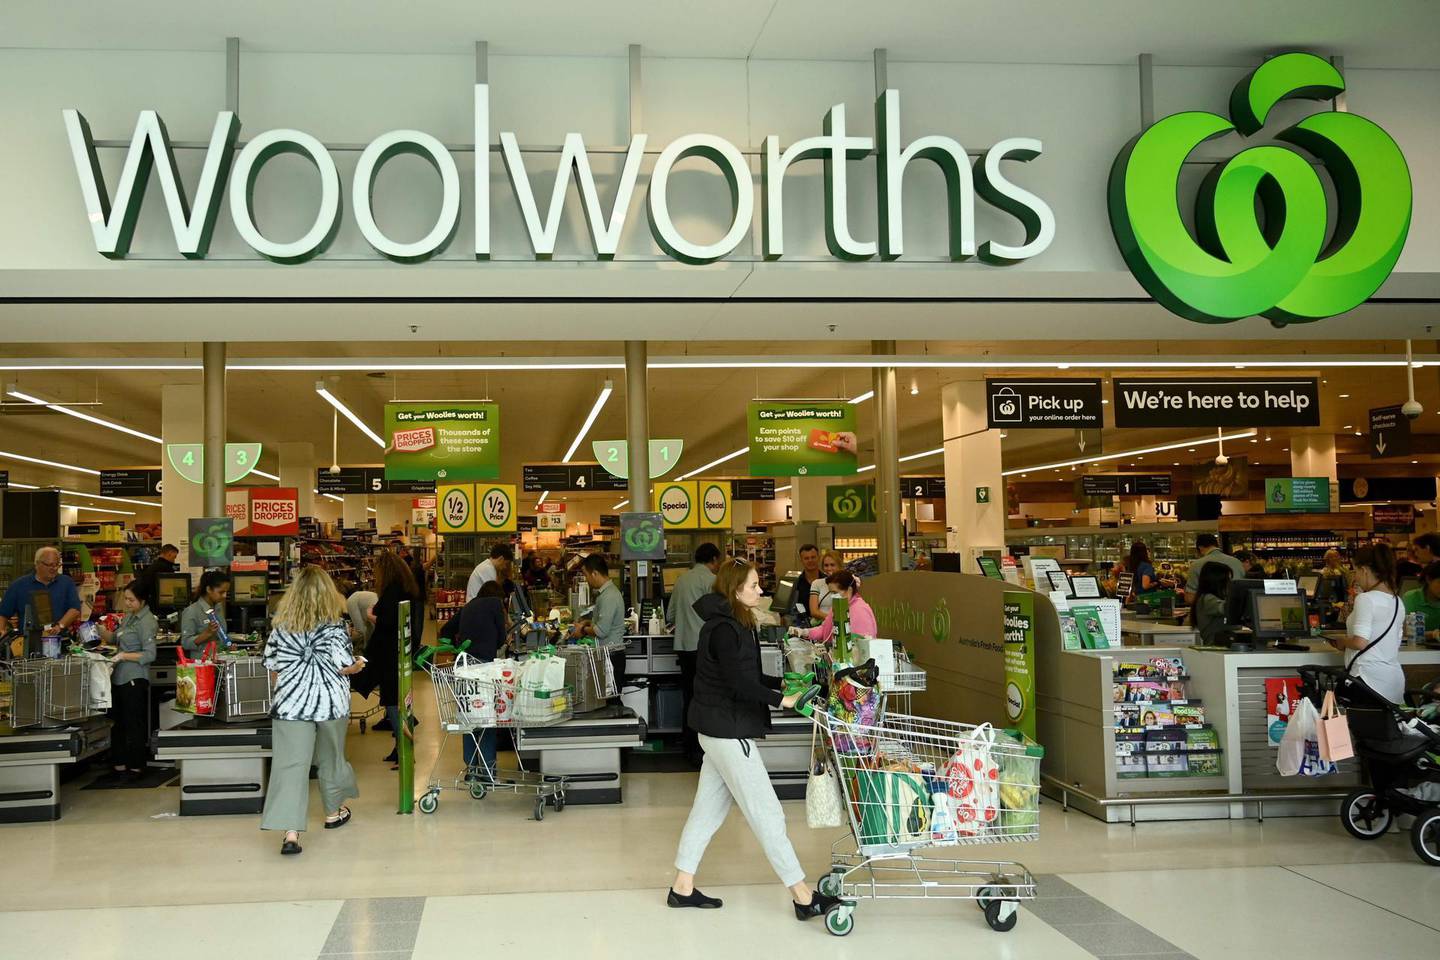 People shop at a Woolworths supermarket in Sydney on March 17, 2020.  Australia's elderly were let in early to supermarkets on March 17, but coronavirus panic buying still proved too much in some areas, with reports of empty shelves and large queues. / AFP / PETER PARKS
